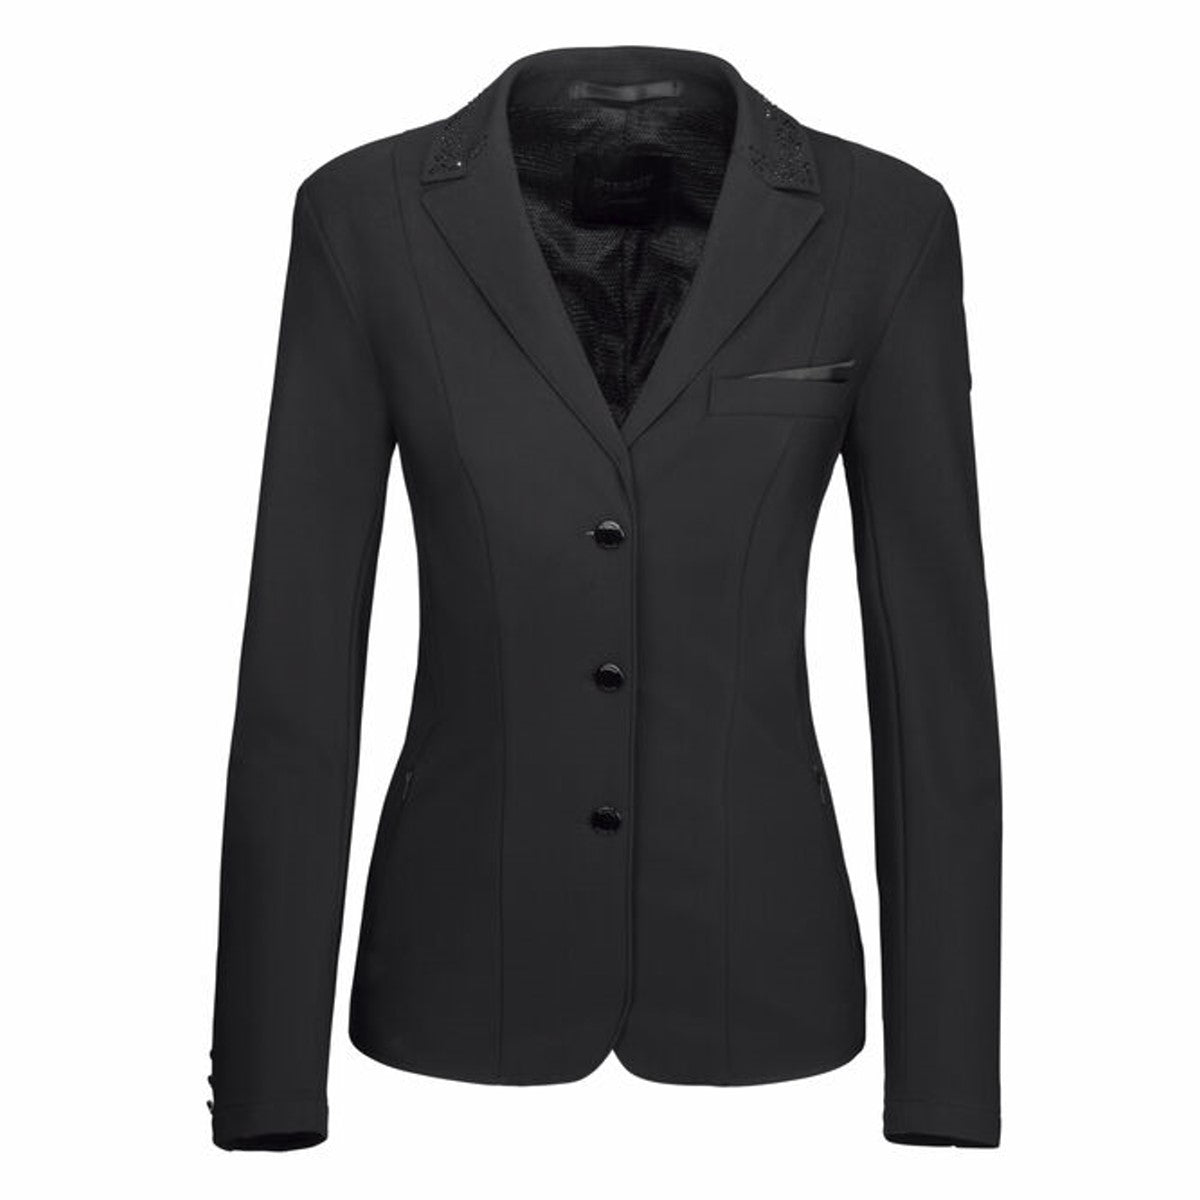 PIKEUR COMPETITION JACKET 2100 SELECTION